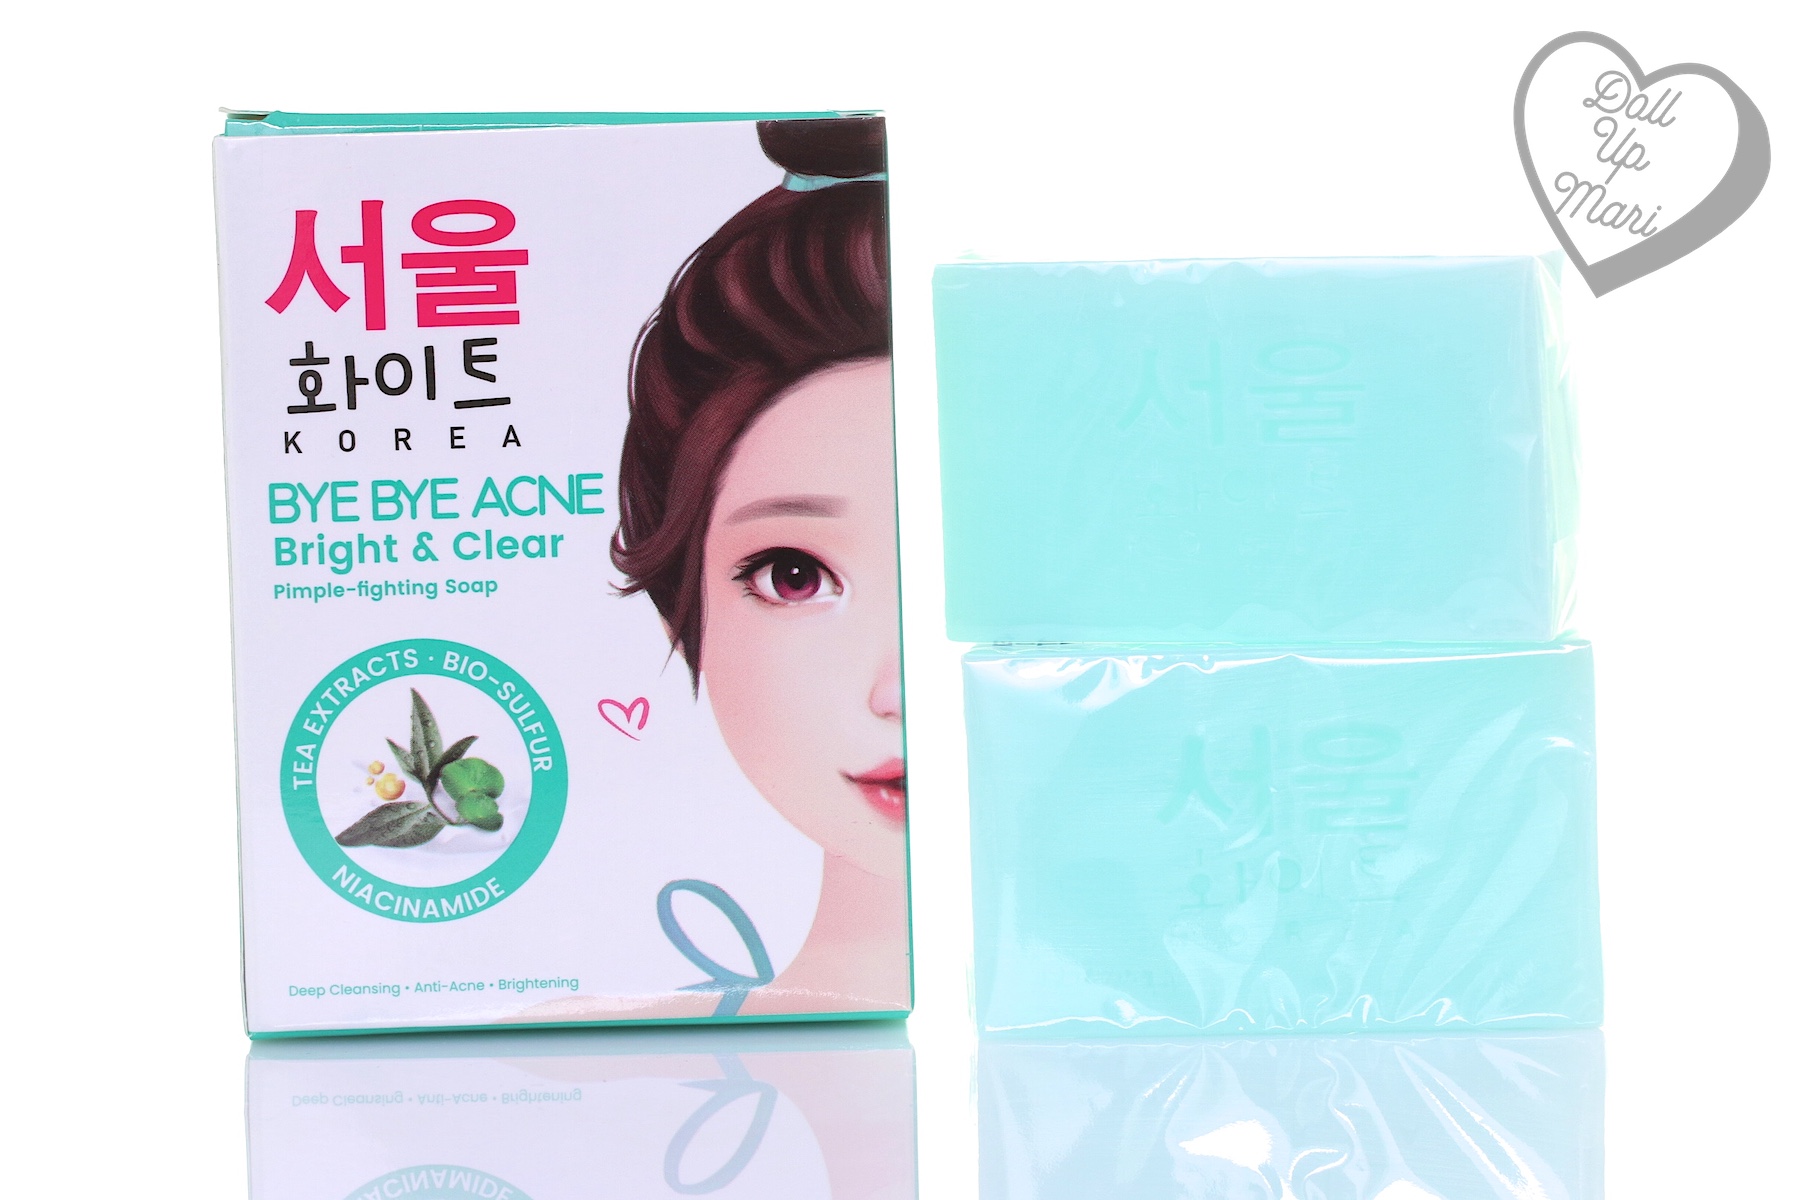 Pack Shot of Seoul White Bye Bye Acne Bright and Clear Pimple Fighting Soap Duo Pack